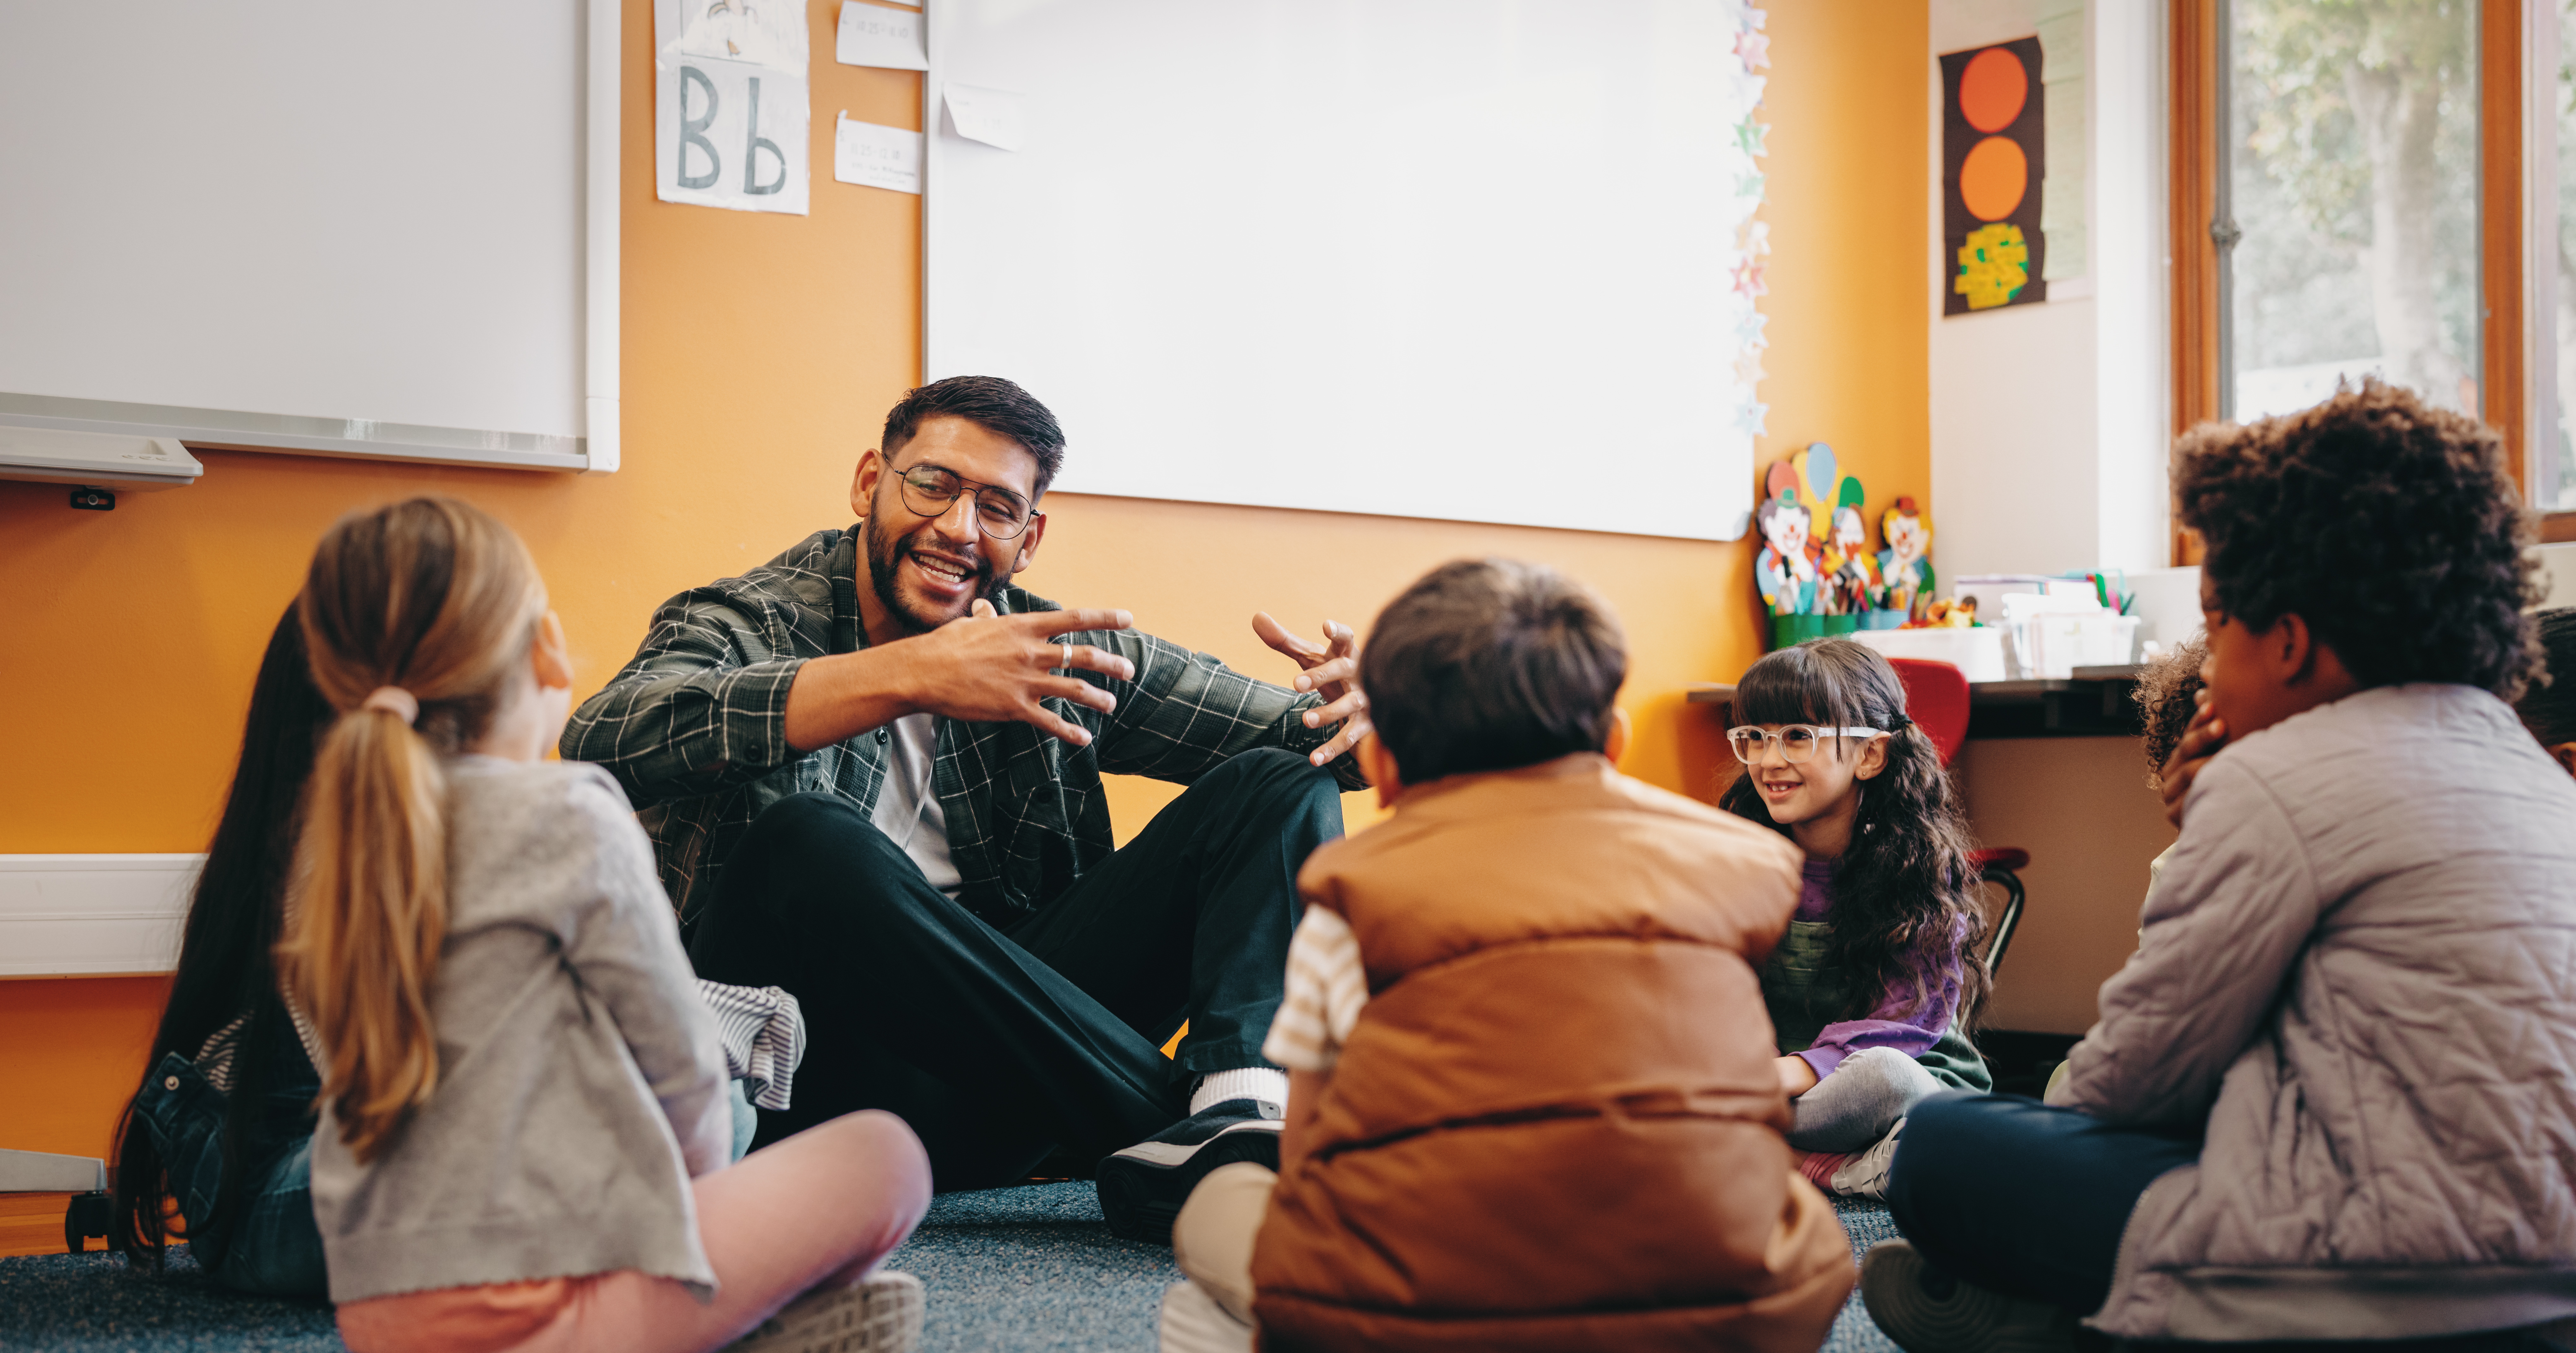 Image shows a teacher and a small group of students sitting on the classroom floor in a circle. He is smiling and gesturing and looking at one of the students and all the students are listening attentively to him.